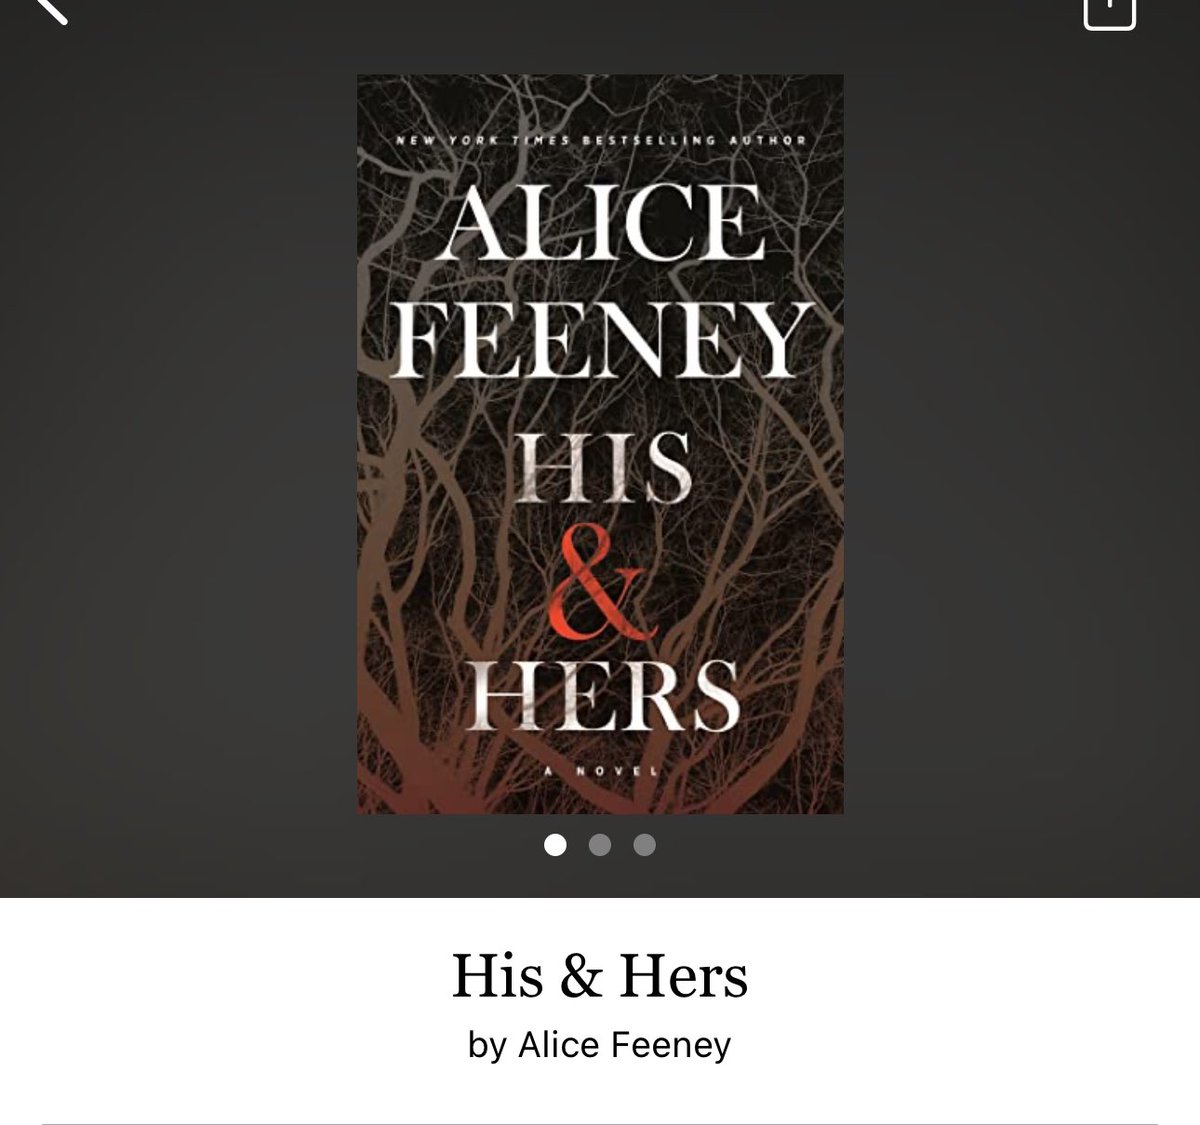 His & Hers by Alice Feeney 

#His&Hers by #AliceFeeney #6217 #71chapters #204paes #366of400 #11houraudiobook #audiobook #3for1 #PsychologicalThriller #april2024 #clearingoffreadingshelves #whatsnext #readitquick